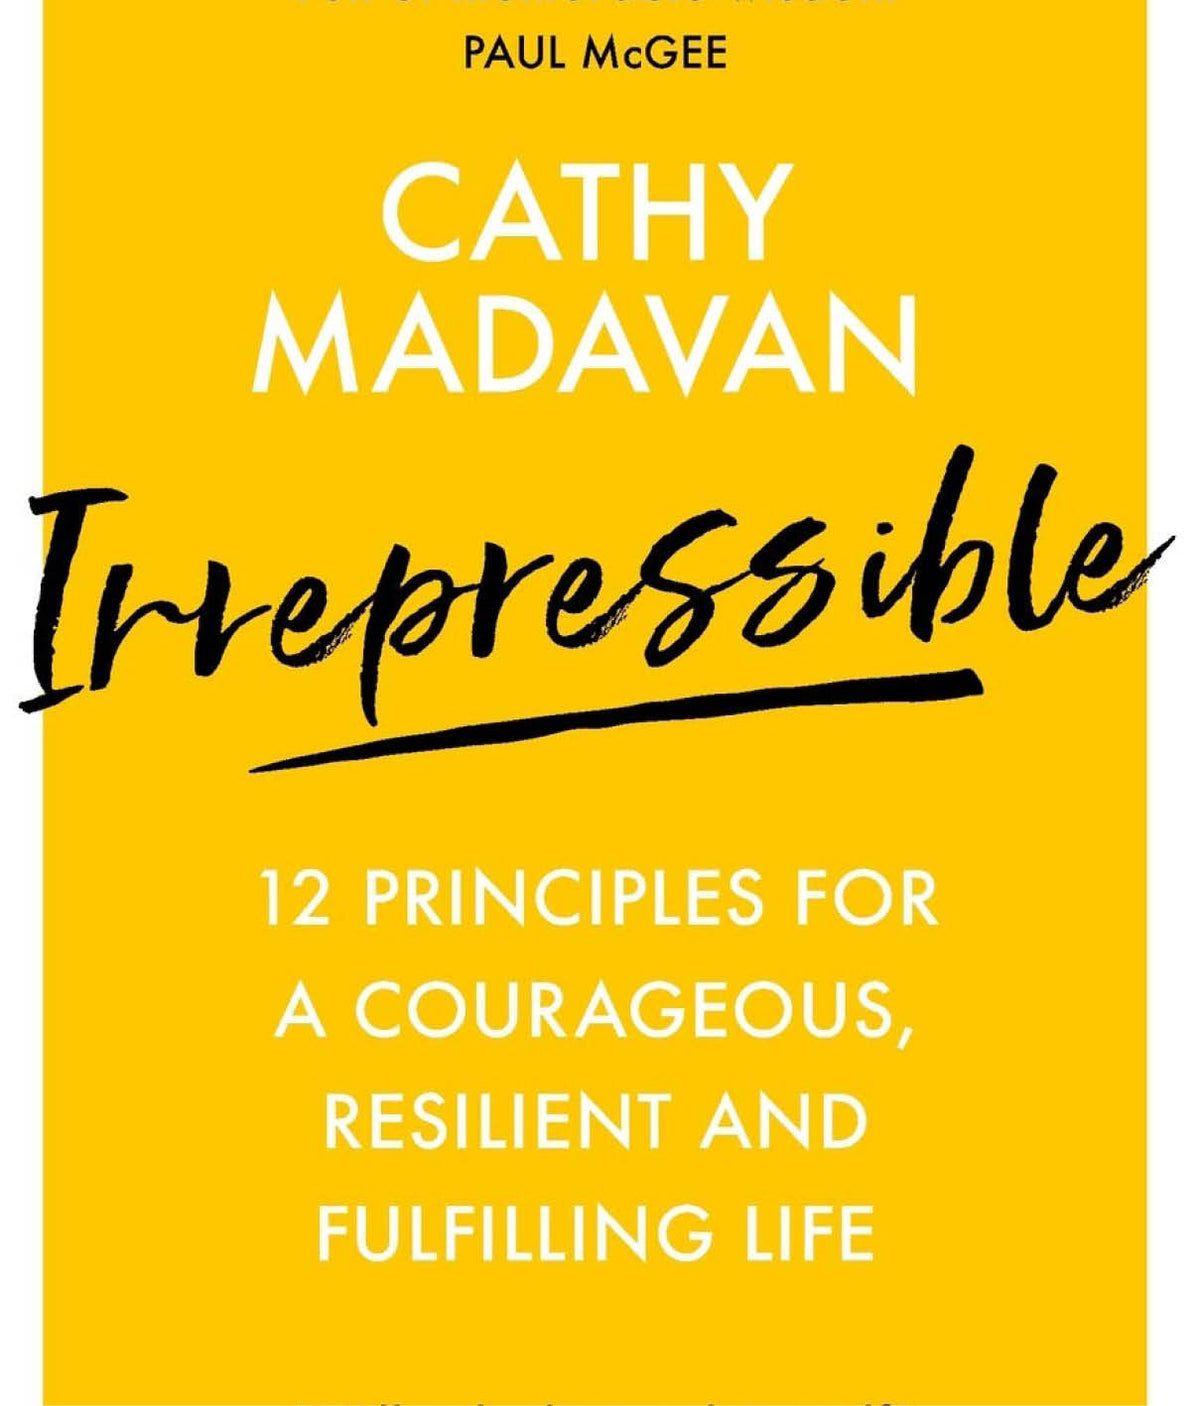 Irrepressible: 12 principles for courageous living by Cathy Madavan